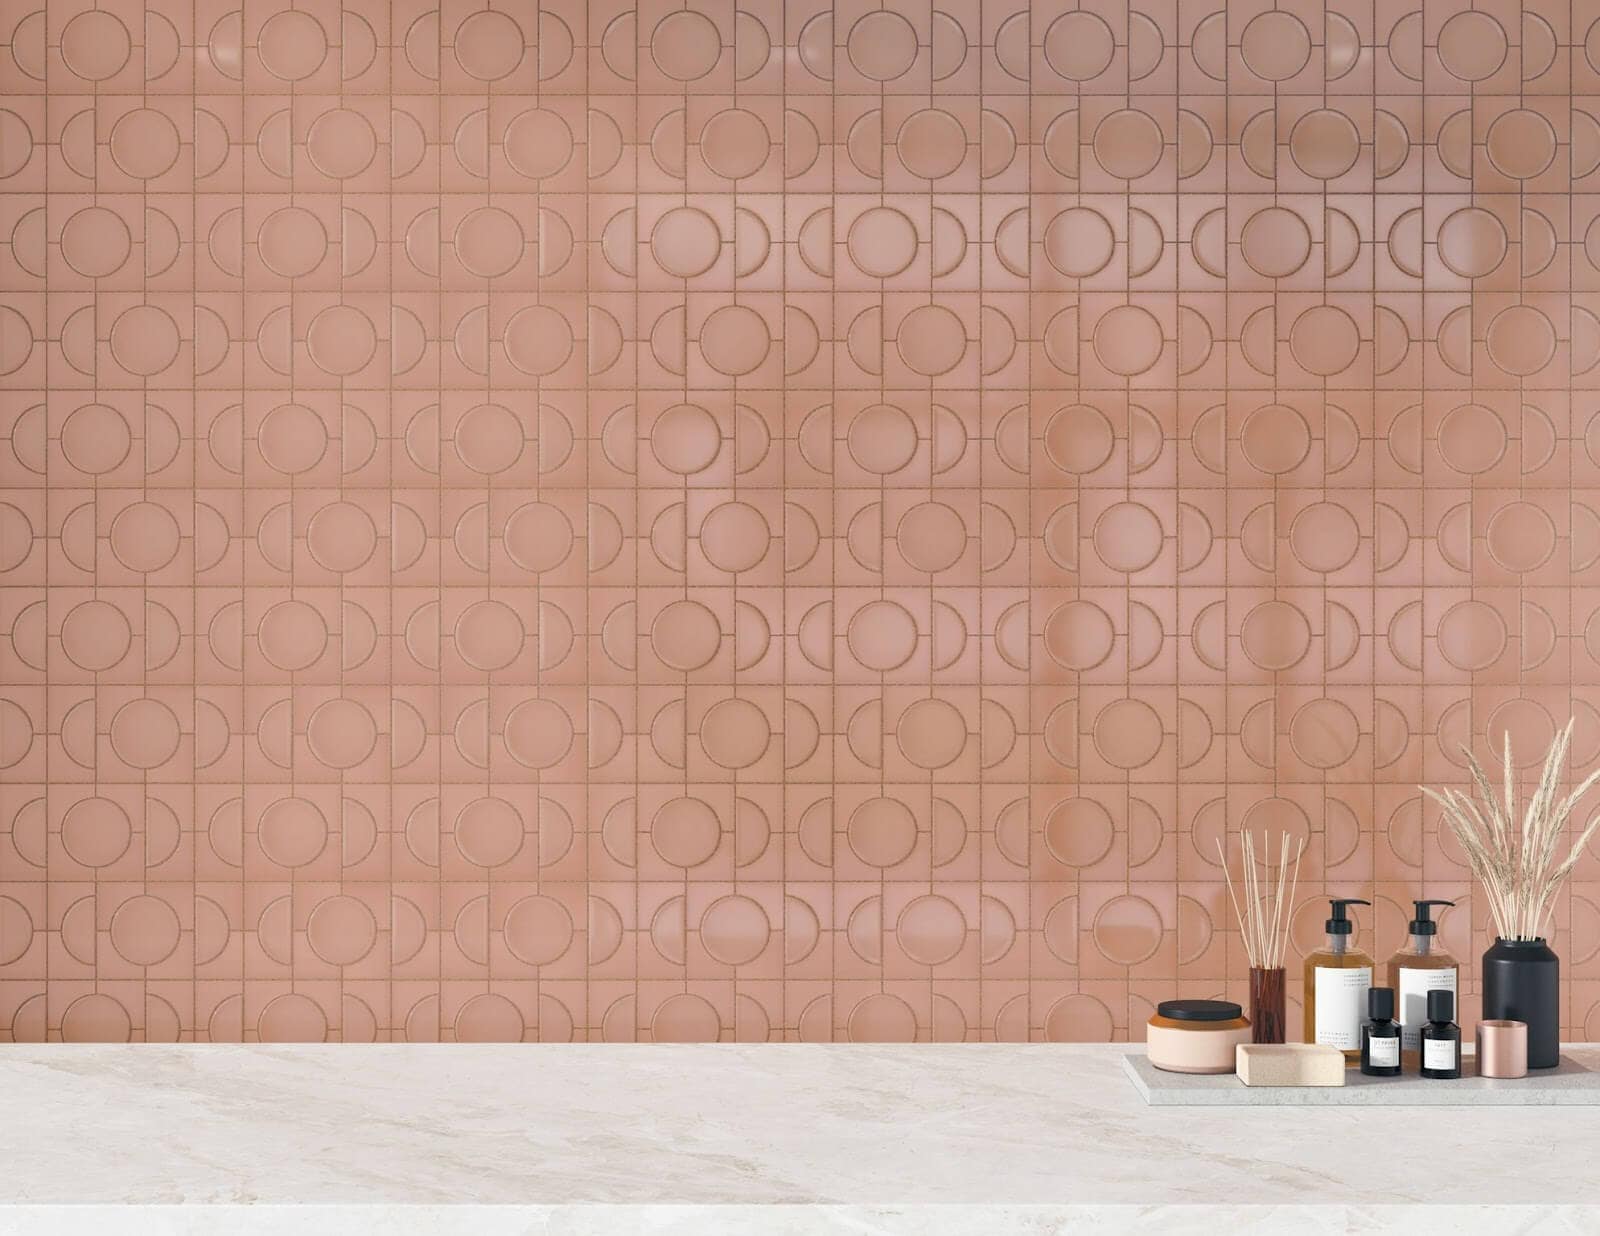 Image of wall with peach tiles